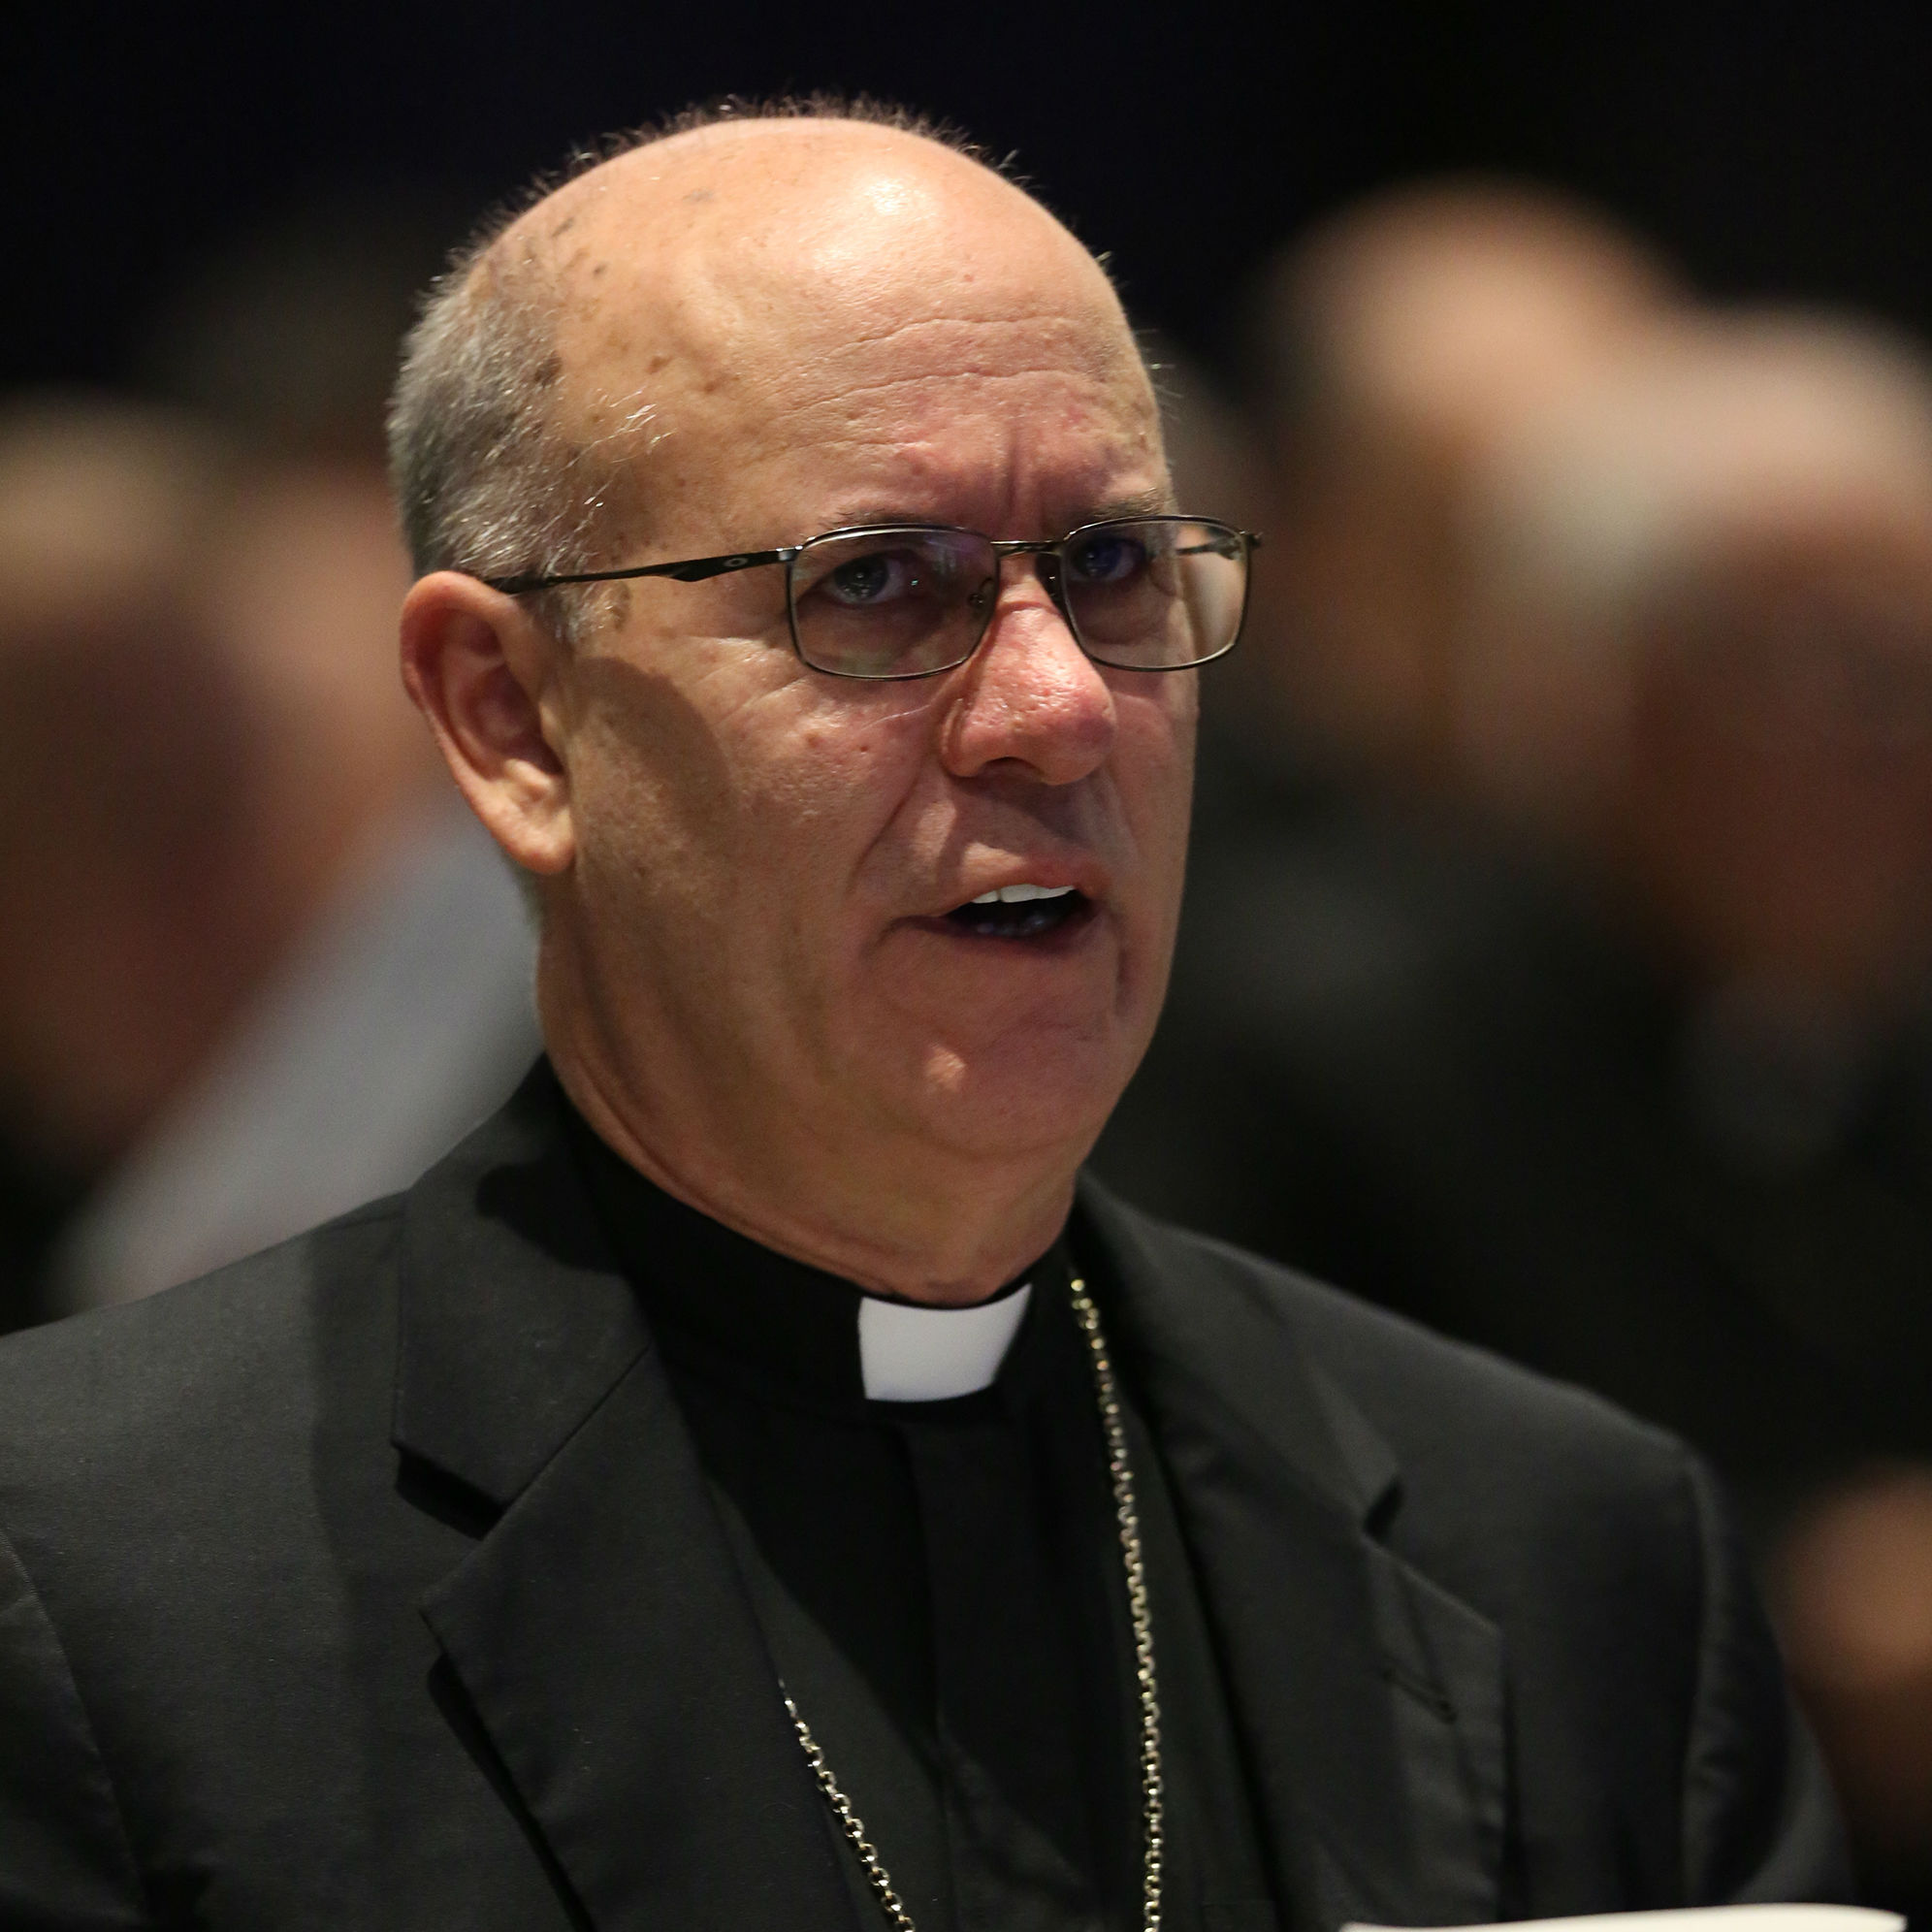 Indiana bishop announces he'll release list of accused abusers in diocese